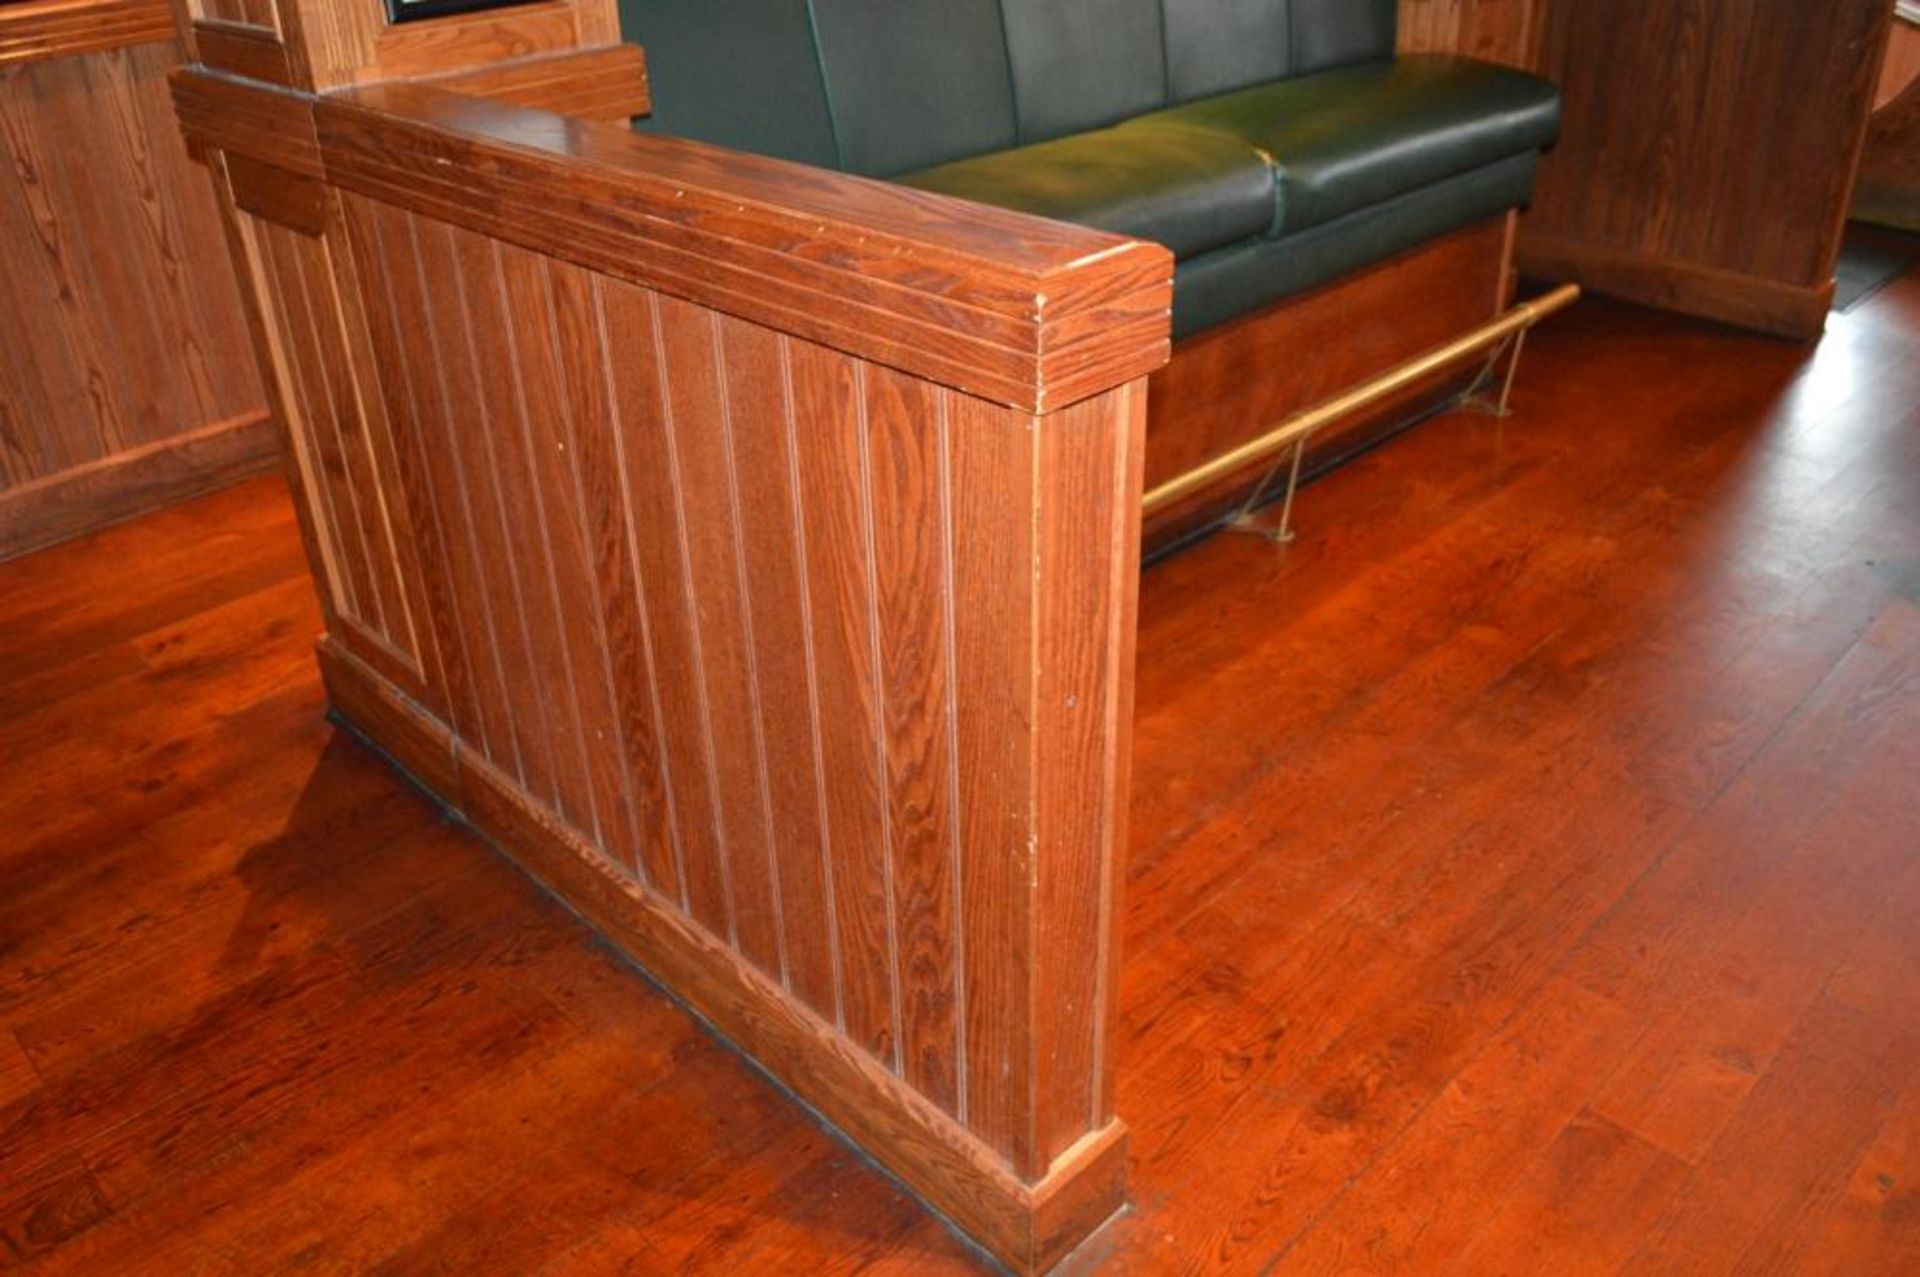 1 x Bar Restaurant Room Partition With Seating Bench, Pillar, Wine Cabinet and Foot Rest - Overall S - Image 6 of 21